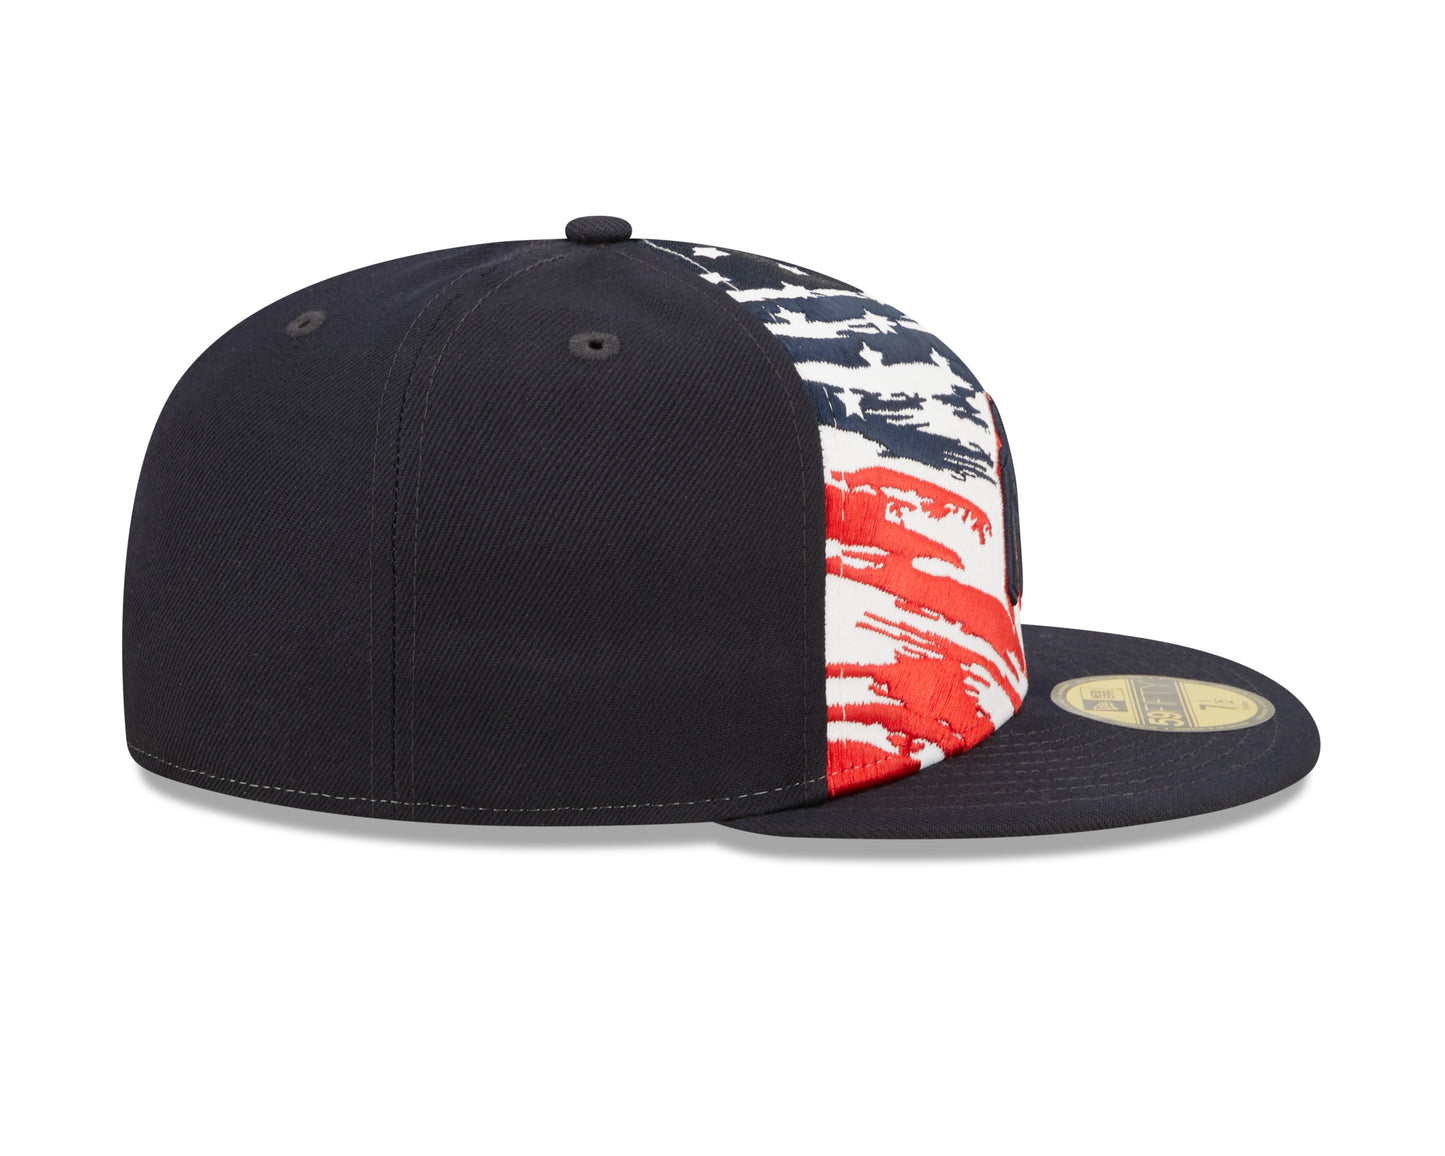 New York Yankees Stars and Stripes July 4th 59fifty Fitted Hats